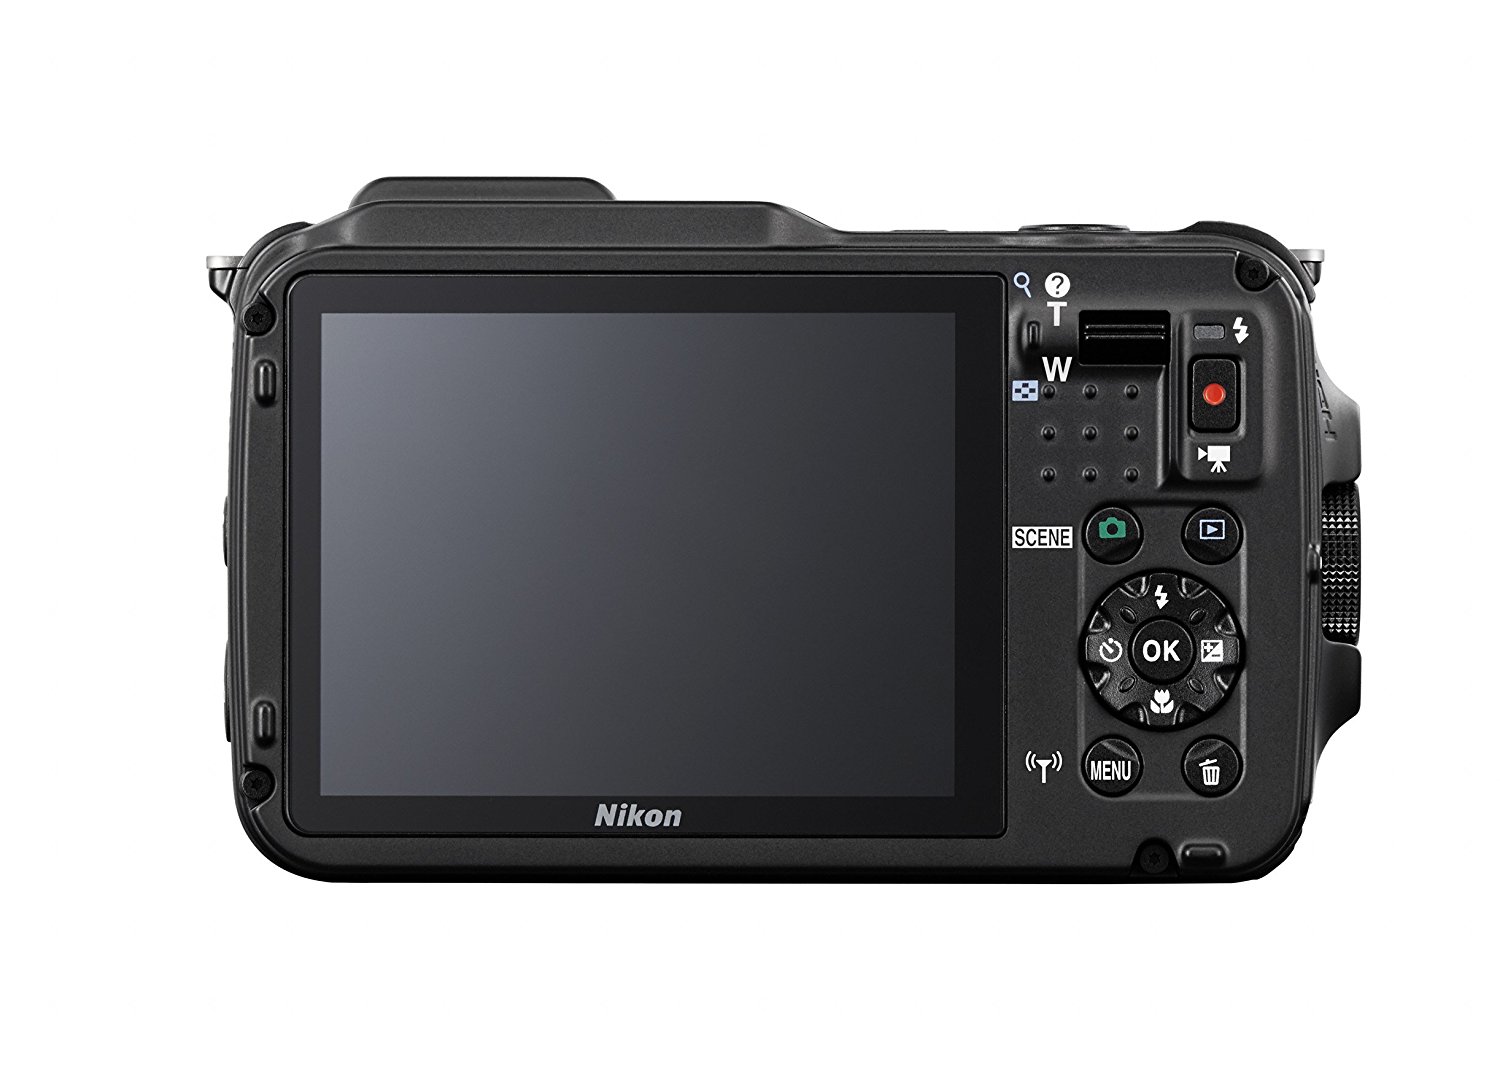 Nikon Coolpix Aw120 161 Mp Wi Fi And Waterproof Digital Camera With Gps And Full Hd 1080p Video 3663